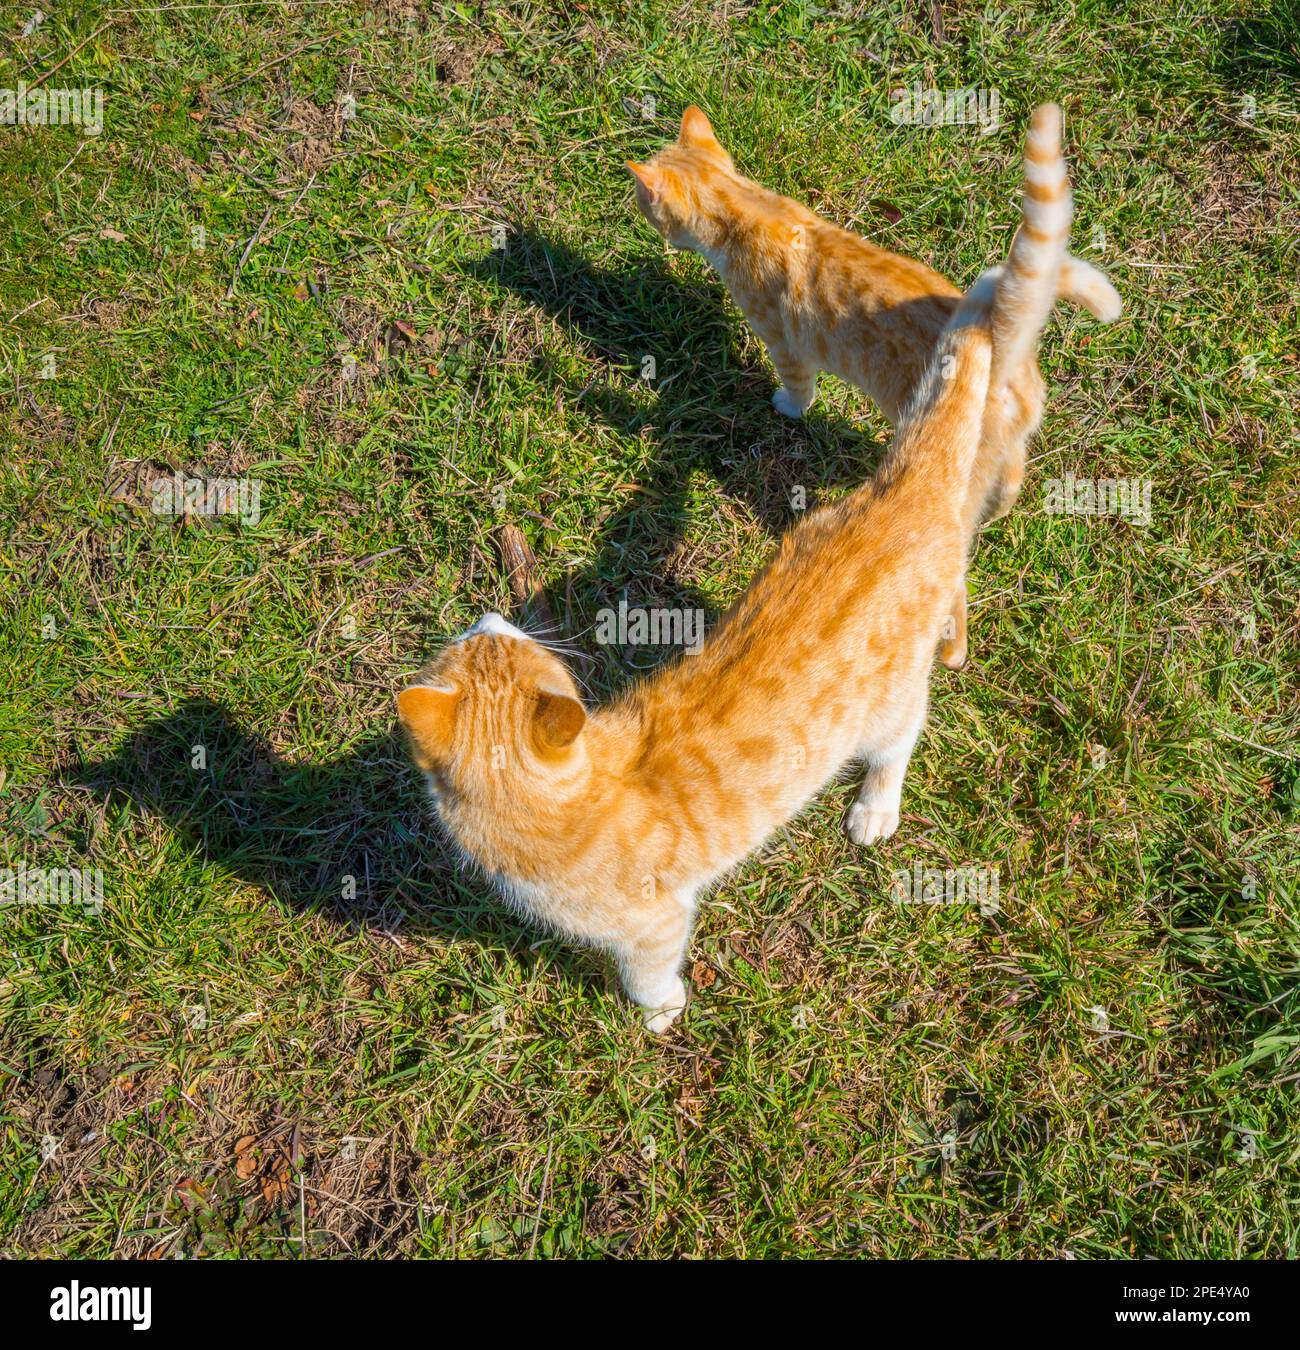 Tabby cats interlacing their tails. Stock Photo